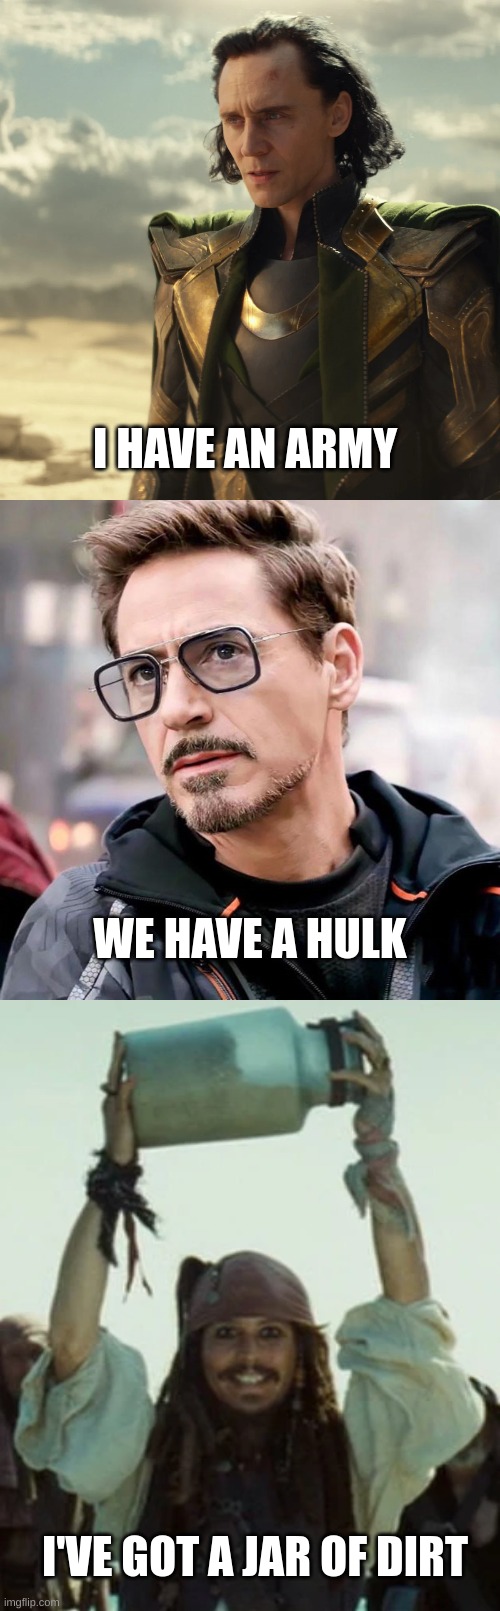 what a guy | I HAVE AN ARMY; WE HAVE A HULK; I'VE GOT A JAR OF DIRT | image tagged in dirt,avengers,jack sparrow,rich | made w/ Imgflip meme maker